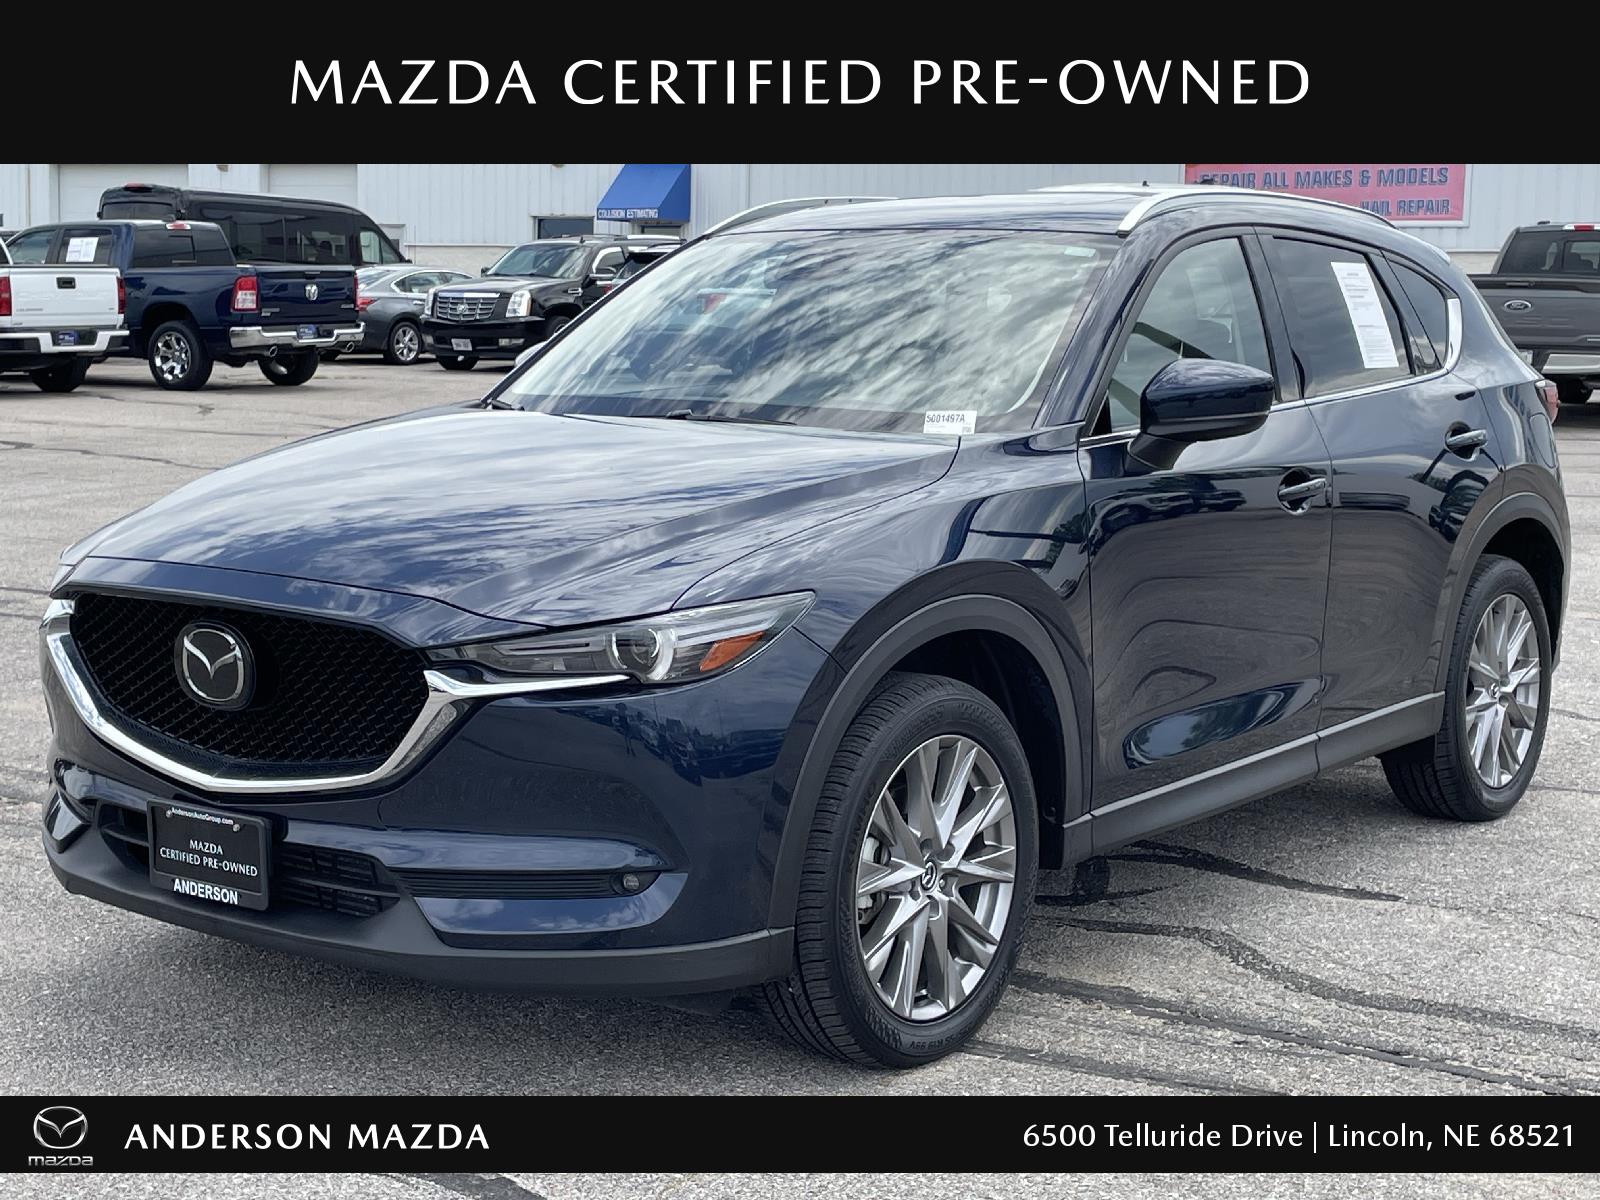 Used 2021 Mazda CX-5 Grand Touring Reserve Stock: 5001497A